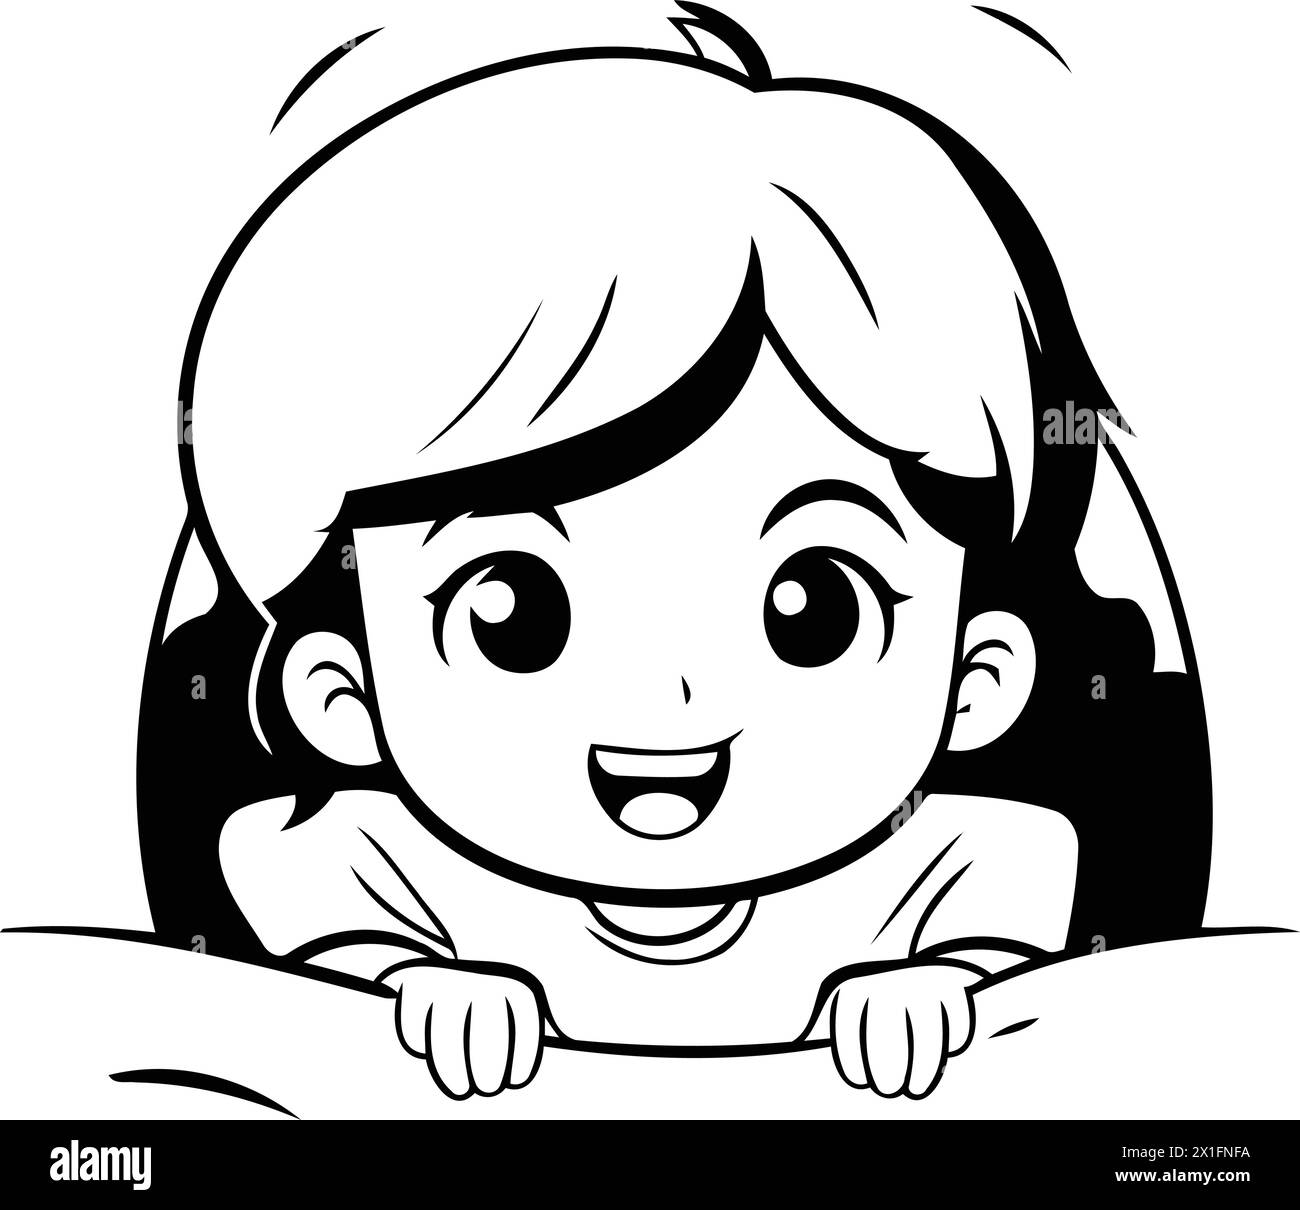 Cute little girl peeking out from behind the wall. Vector illustration. Stock Vector